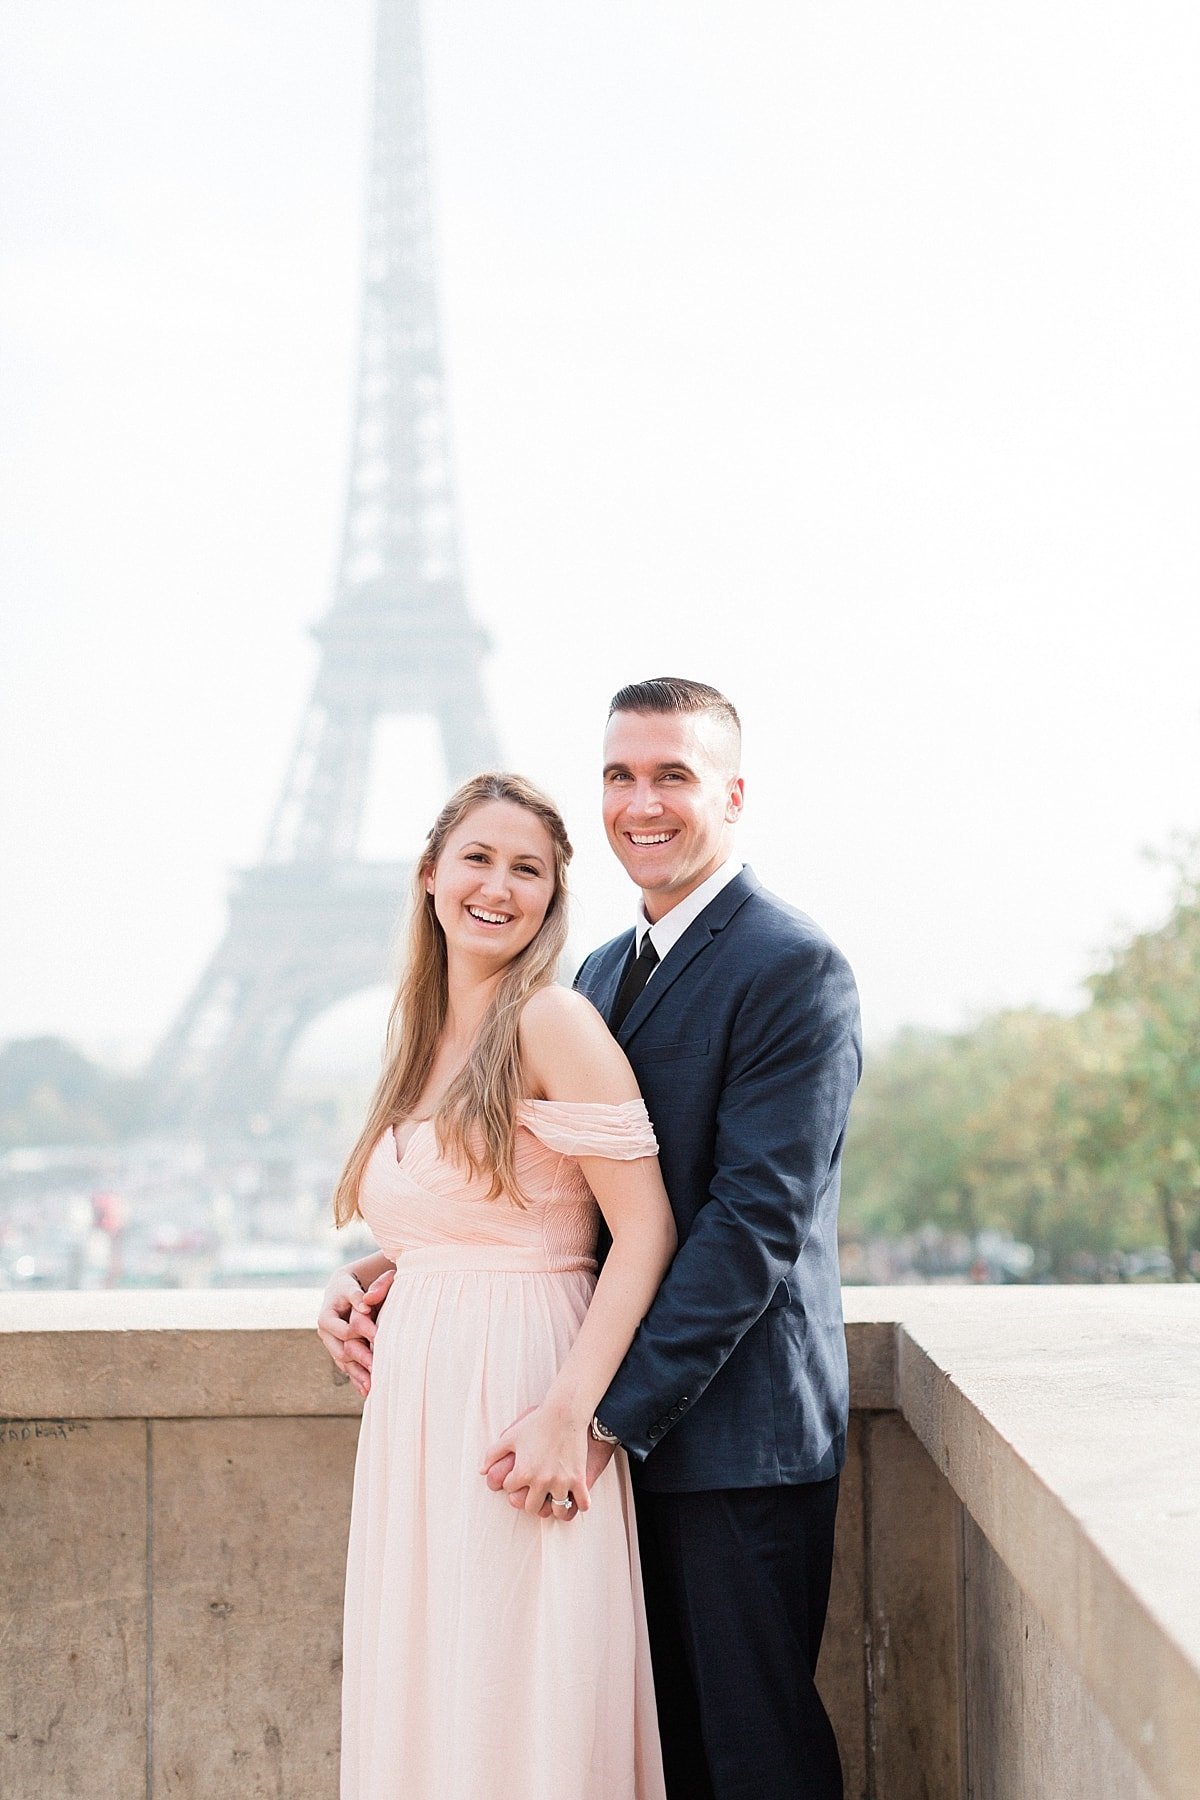 Paris, France anniversary session photographed at the Eiffel Tower by France Destination Wedding Photographer, Alicia Yarrish Photography